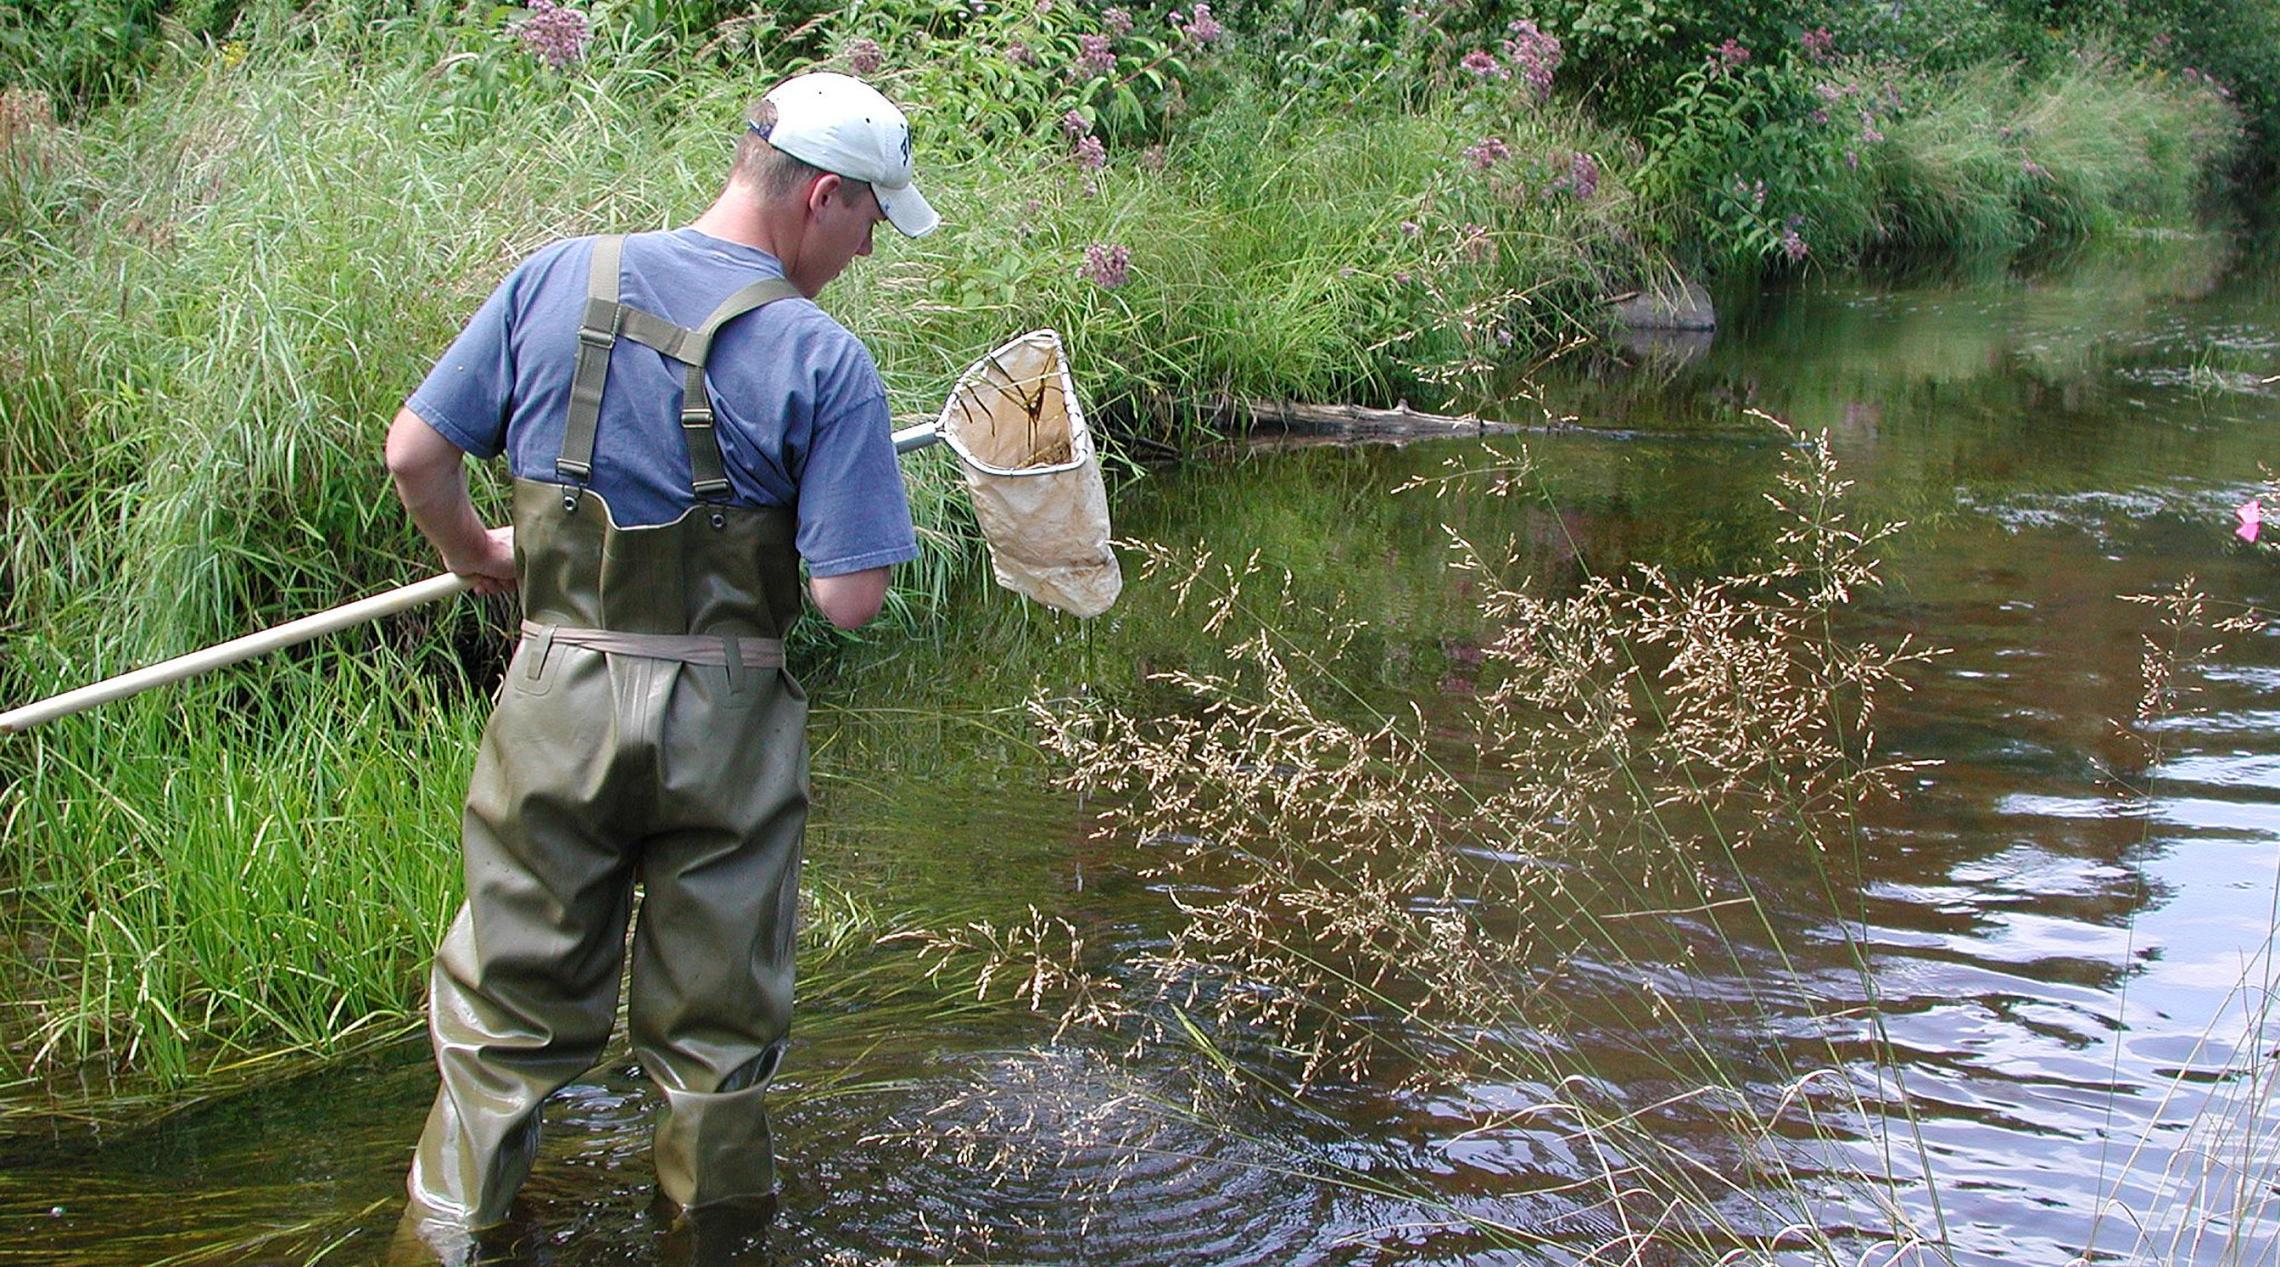 Man taking water sample from a stream